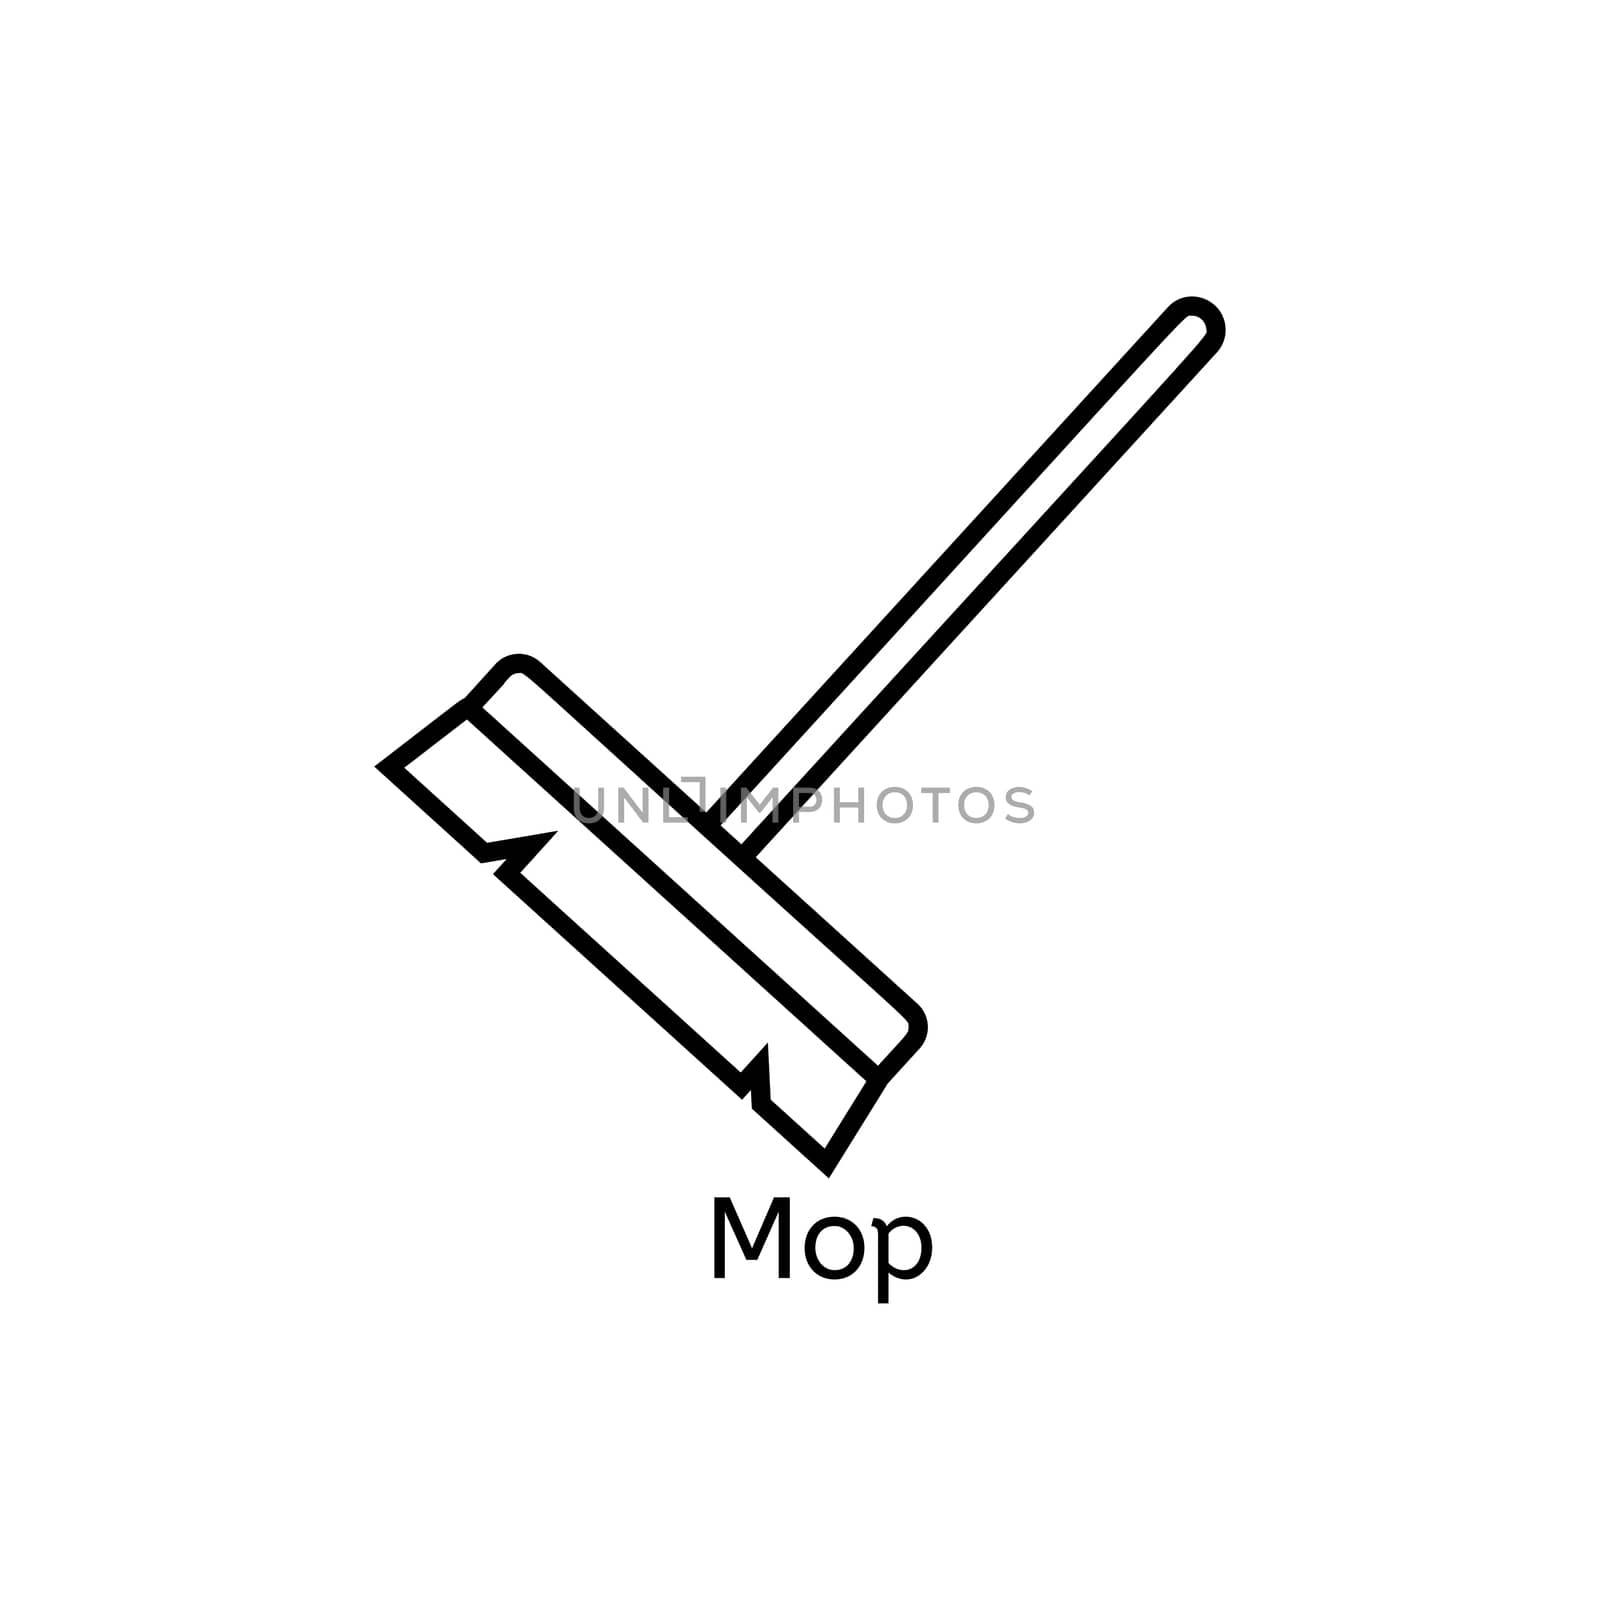 Mop simple line icon. Floor cleaning thin linear signs. Cleaning simple concept for websites, infographic, mobile applications. by Elena_Garder